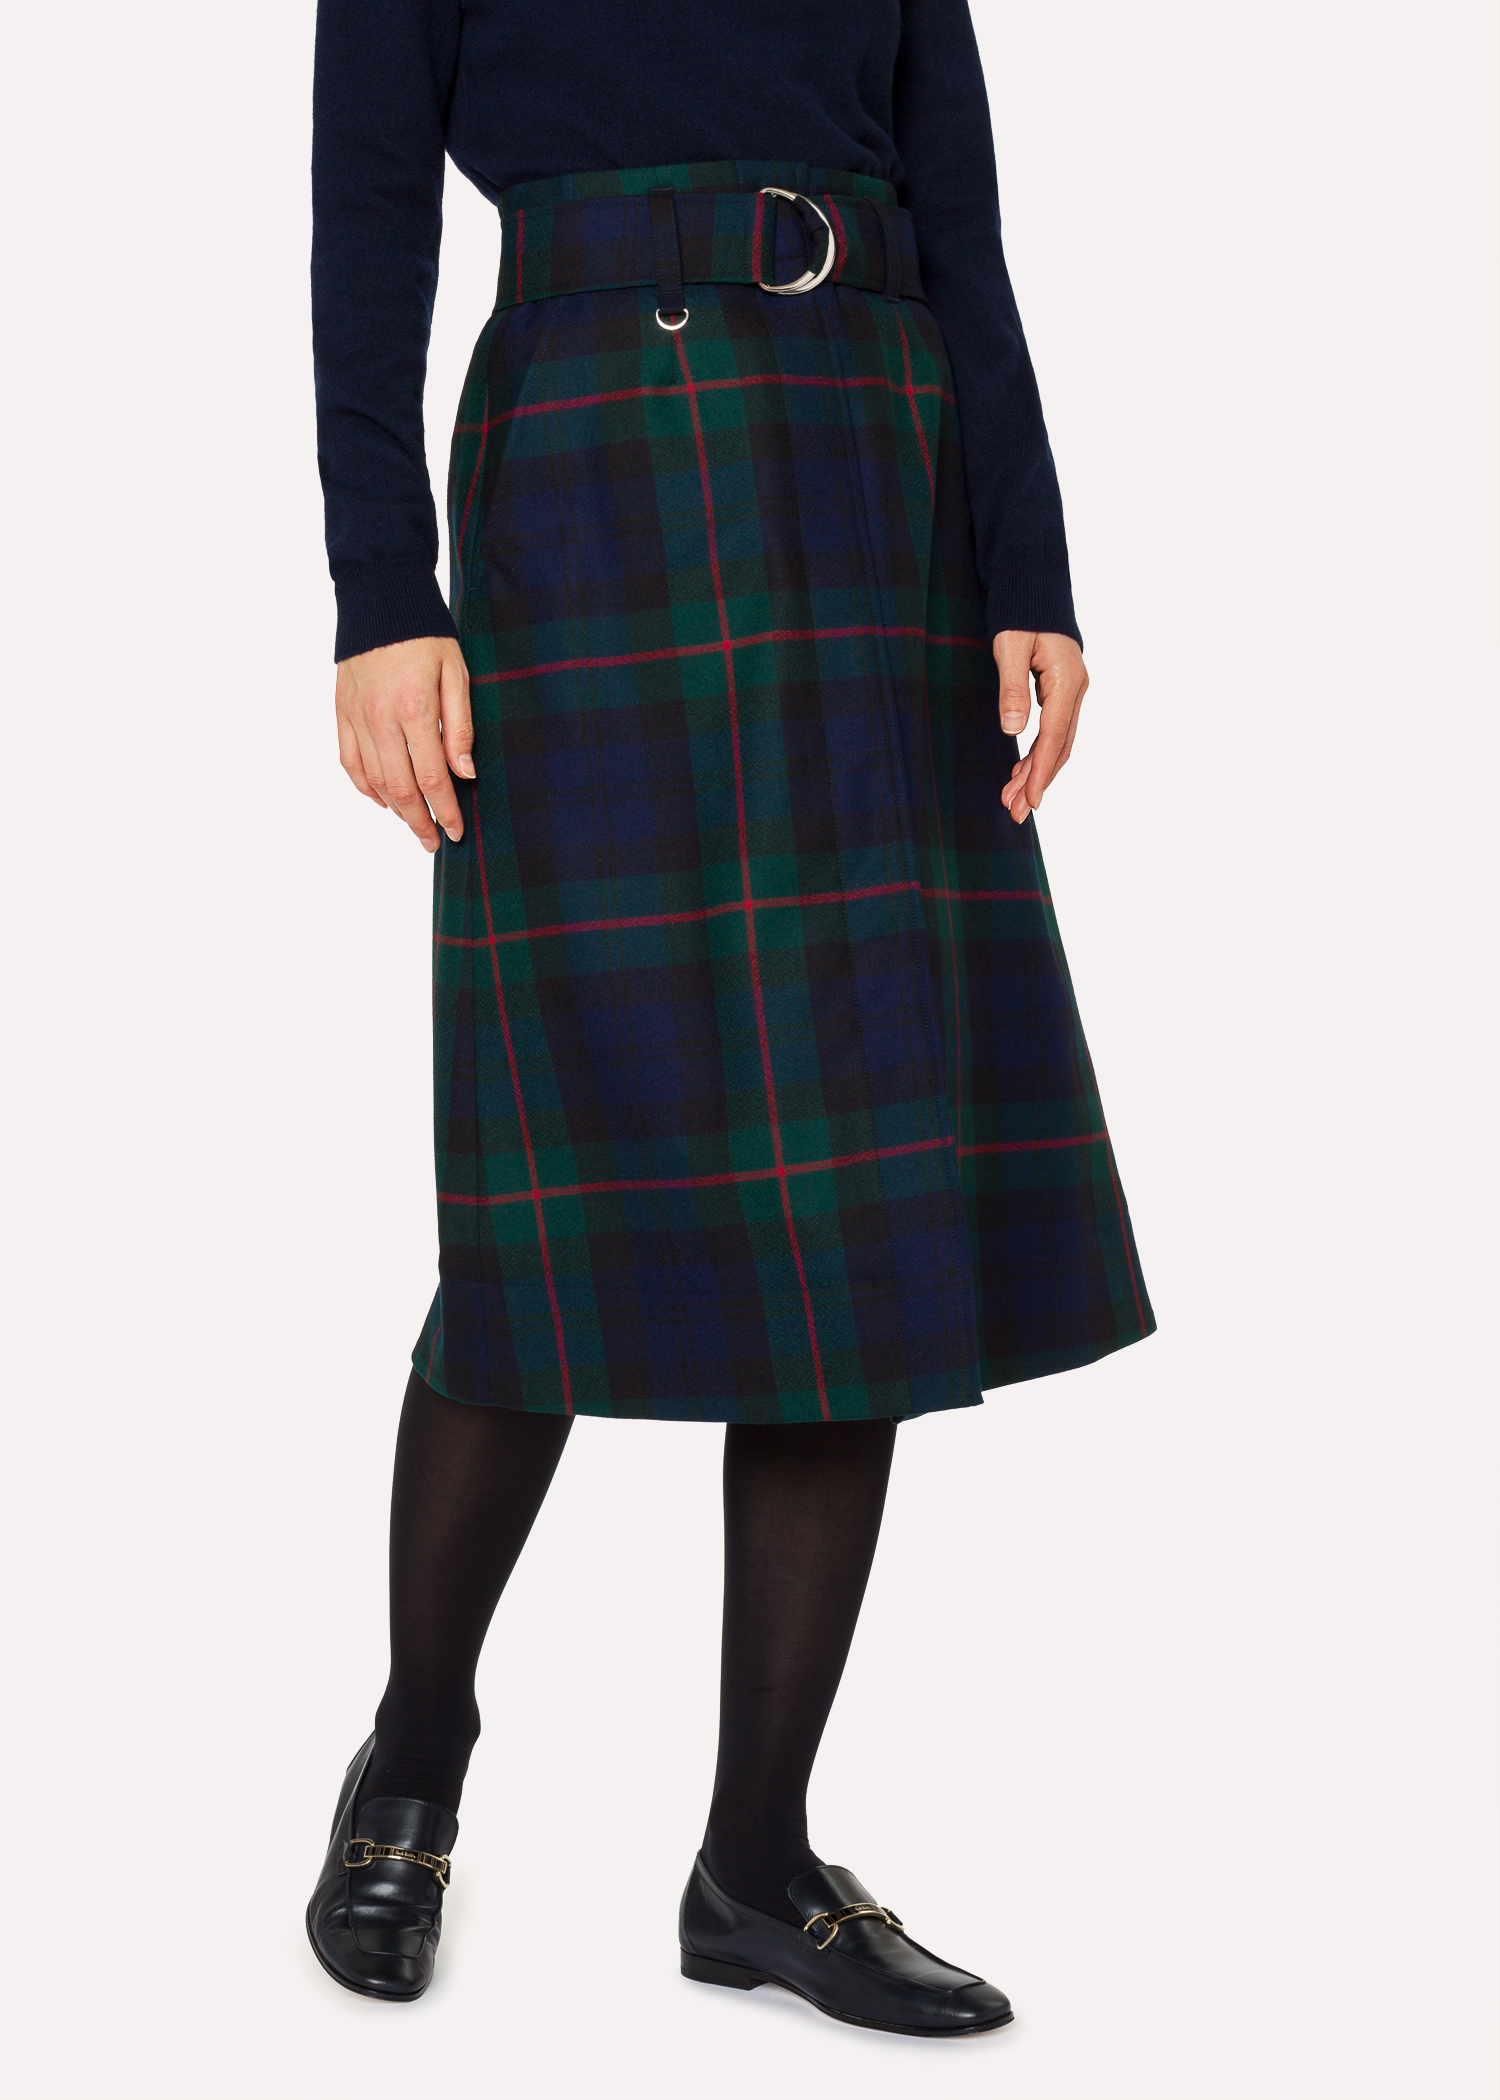 Women's Navy, Green And Red Tartan A-Line Midi Skirt With Belt - Paul Smith